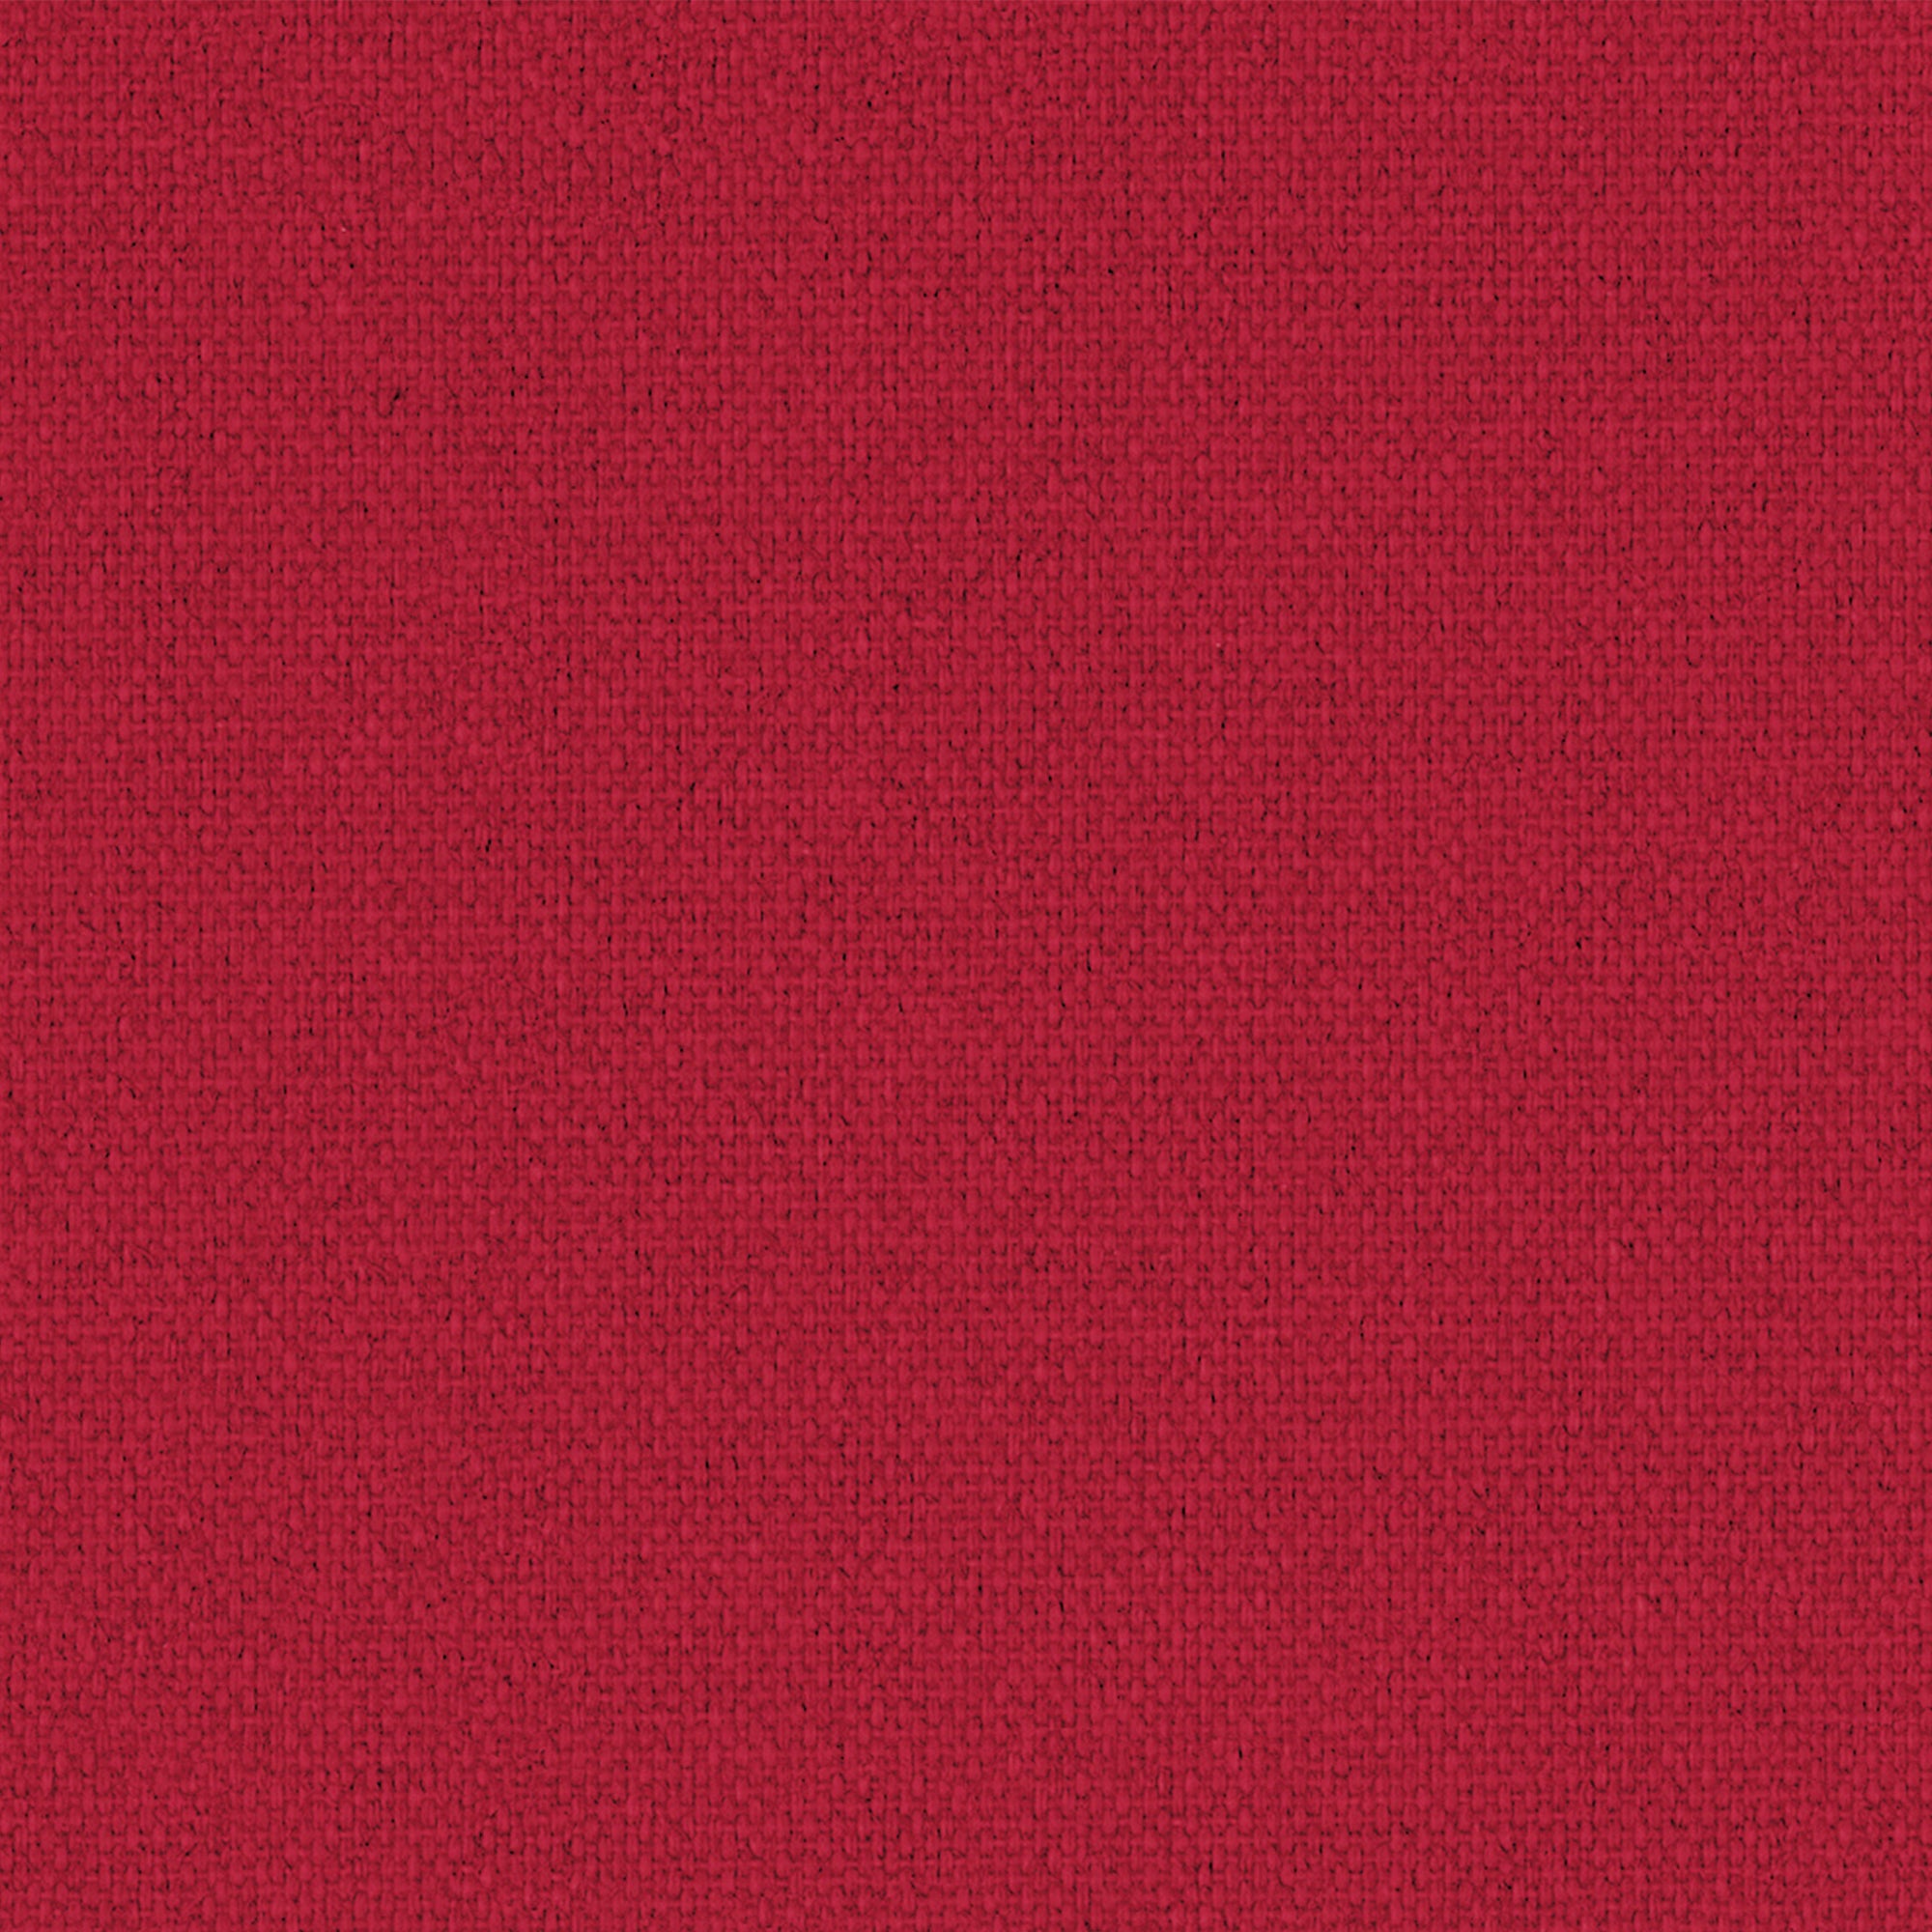 Iona Daylight Made to Measure Flame Retardant Roller Blind Fabric Sample Iona Scarlet